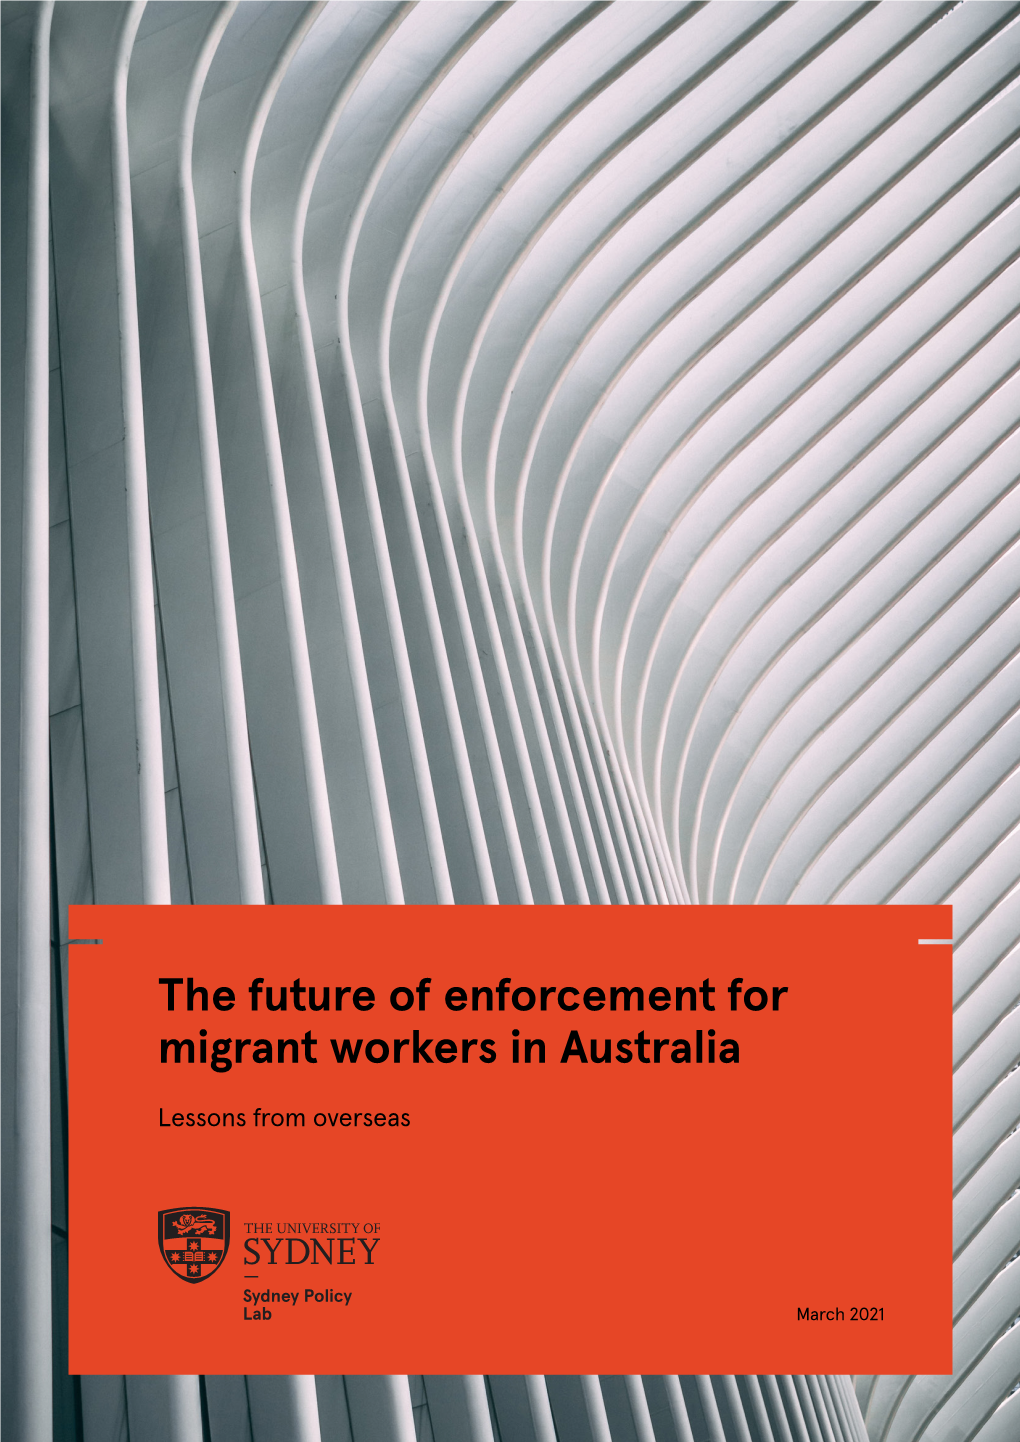 The Future of Enforcement for Migrant Workers in Australia